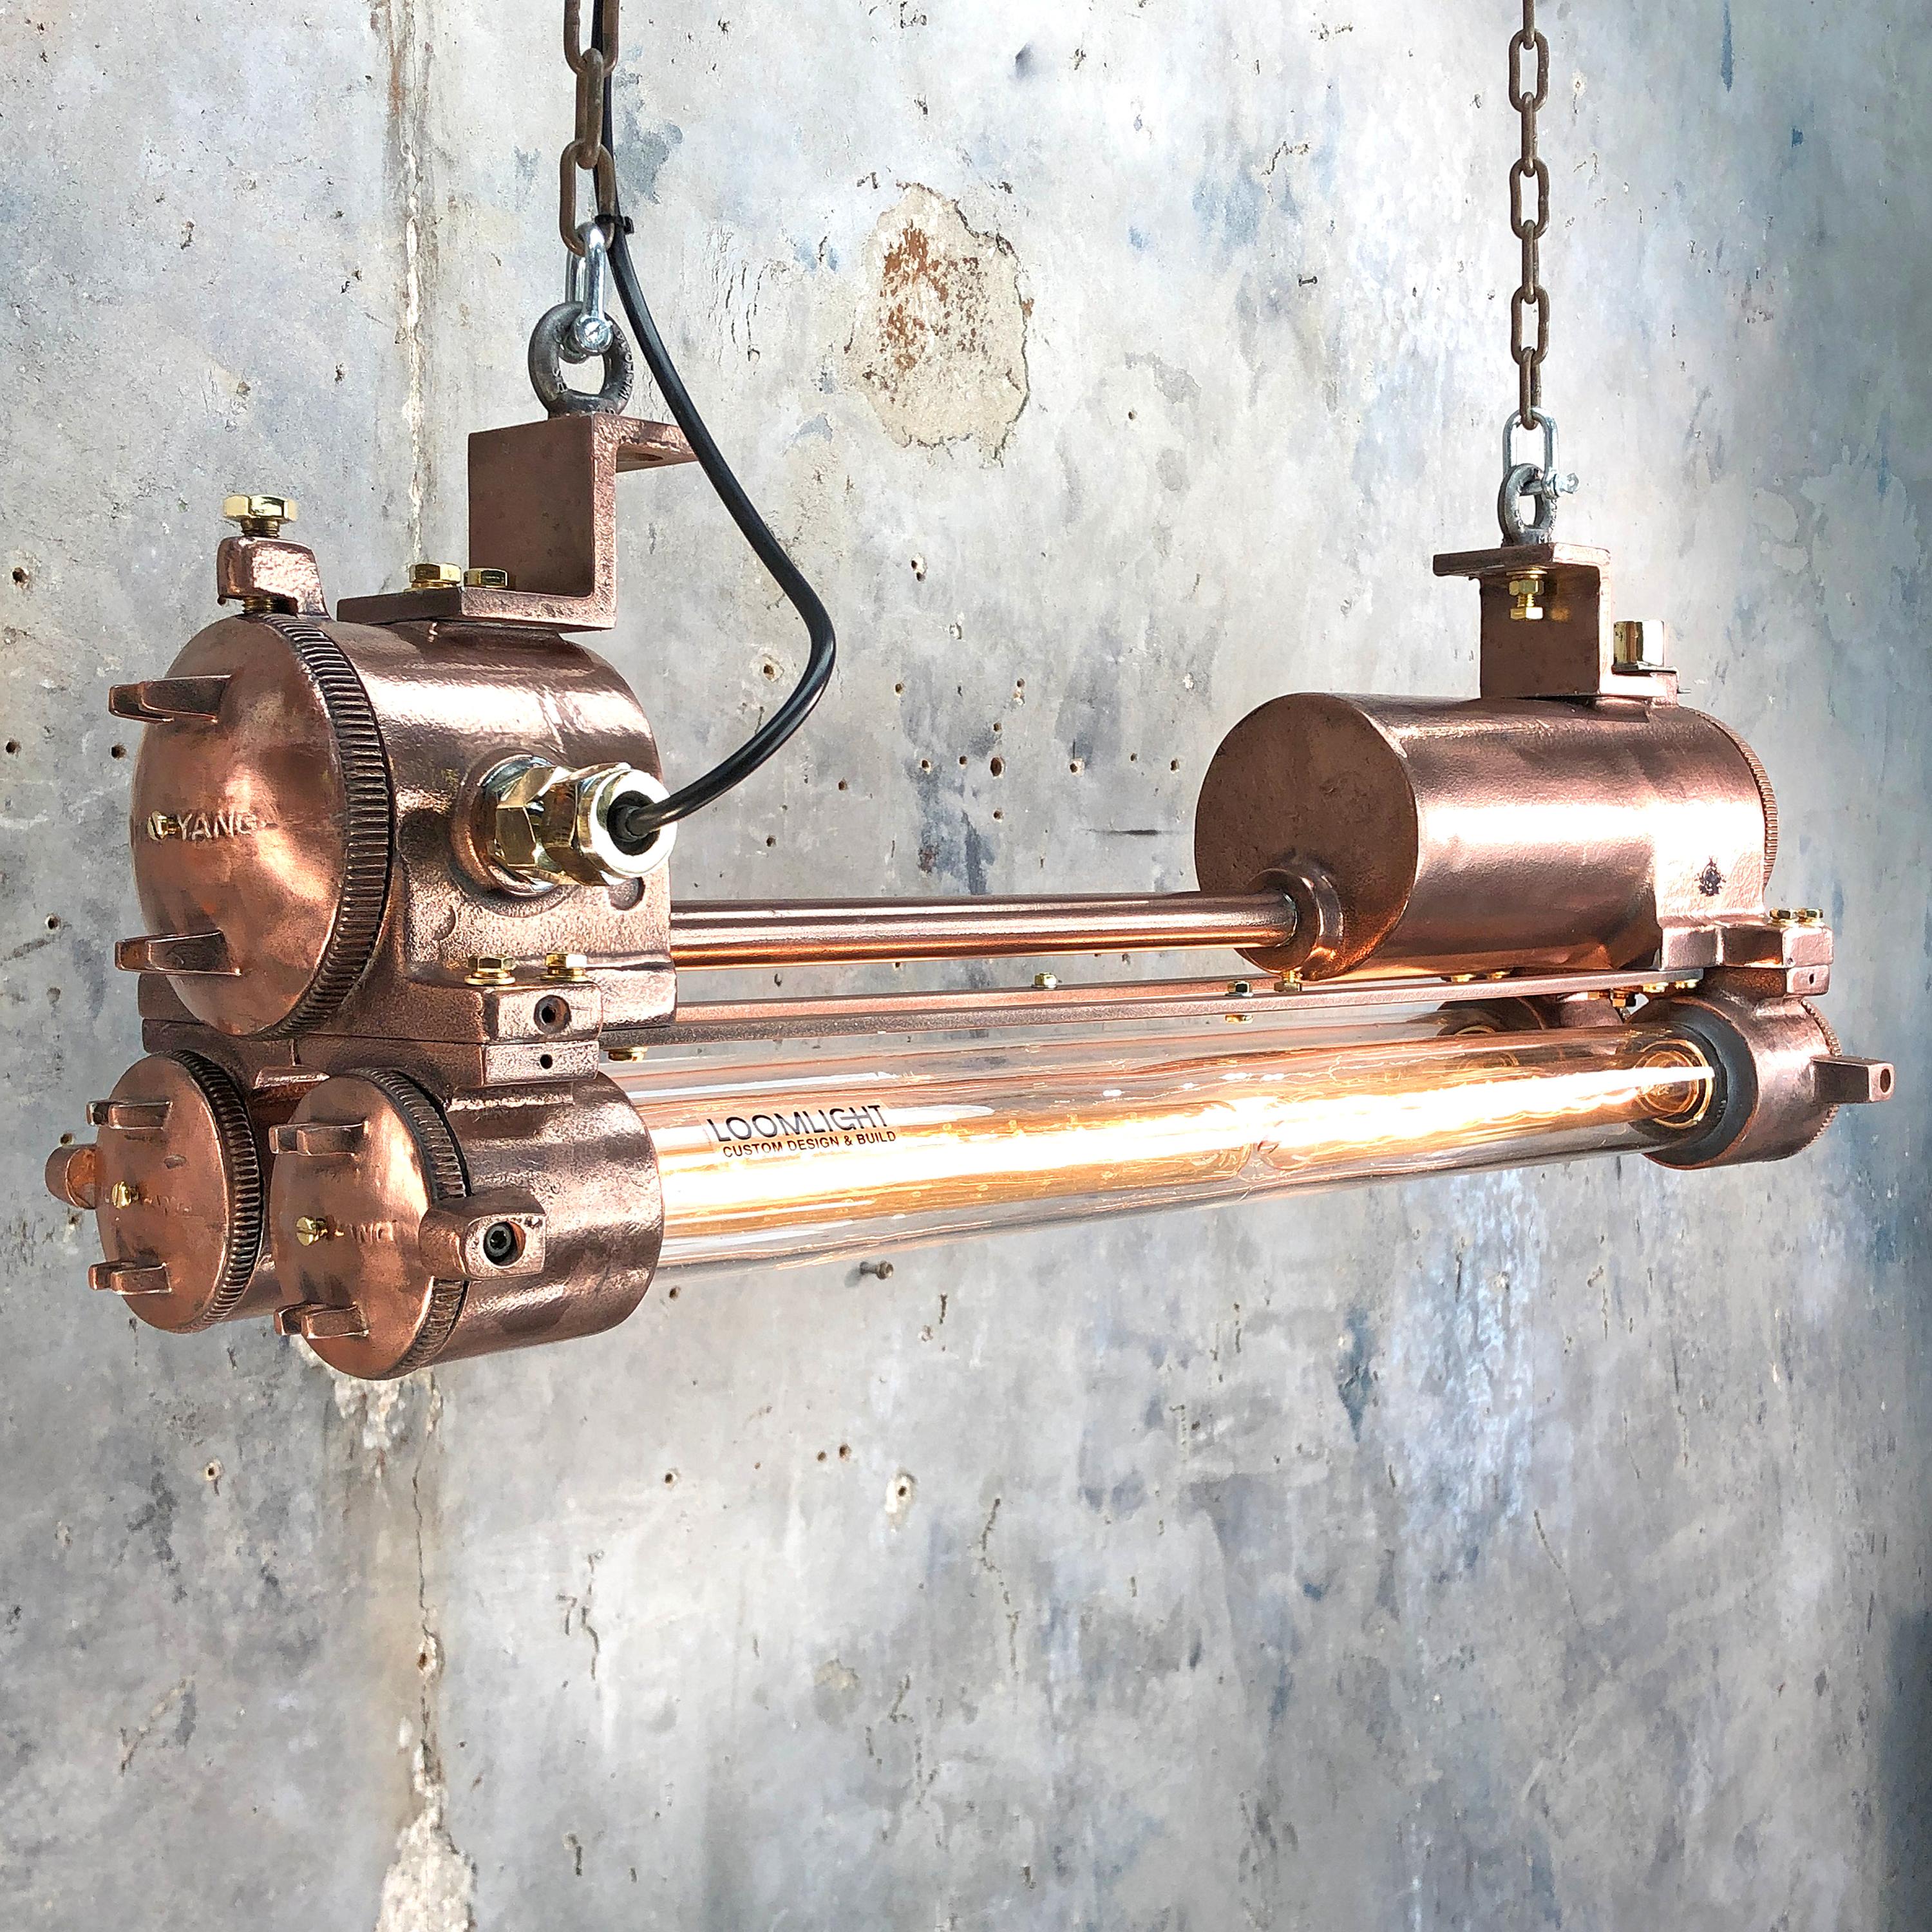 Reclaimed vintage industrial Korean flameproof strip light made by Daeyang in the 1970s with copper veneer finishing.
 
Original item salvaged from supertankers and military vessels then professionally restored in-house in the UK ready for modern